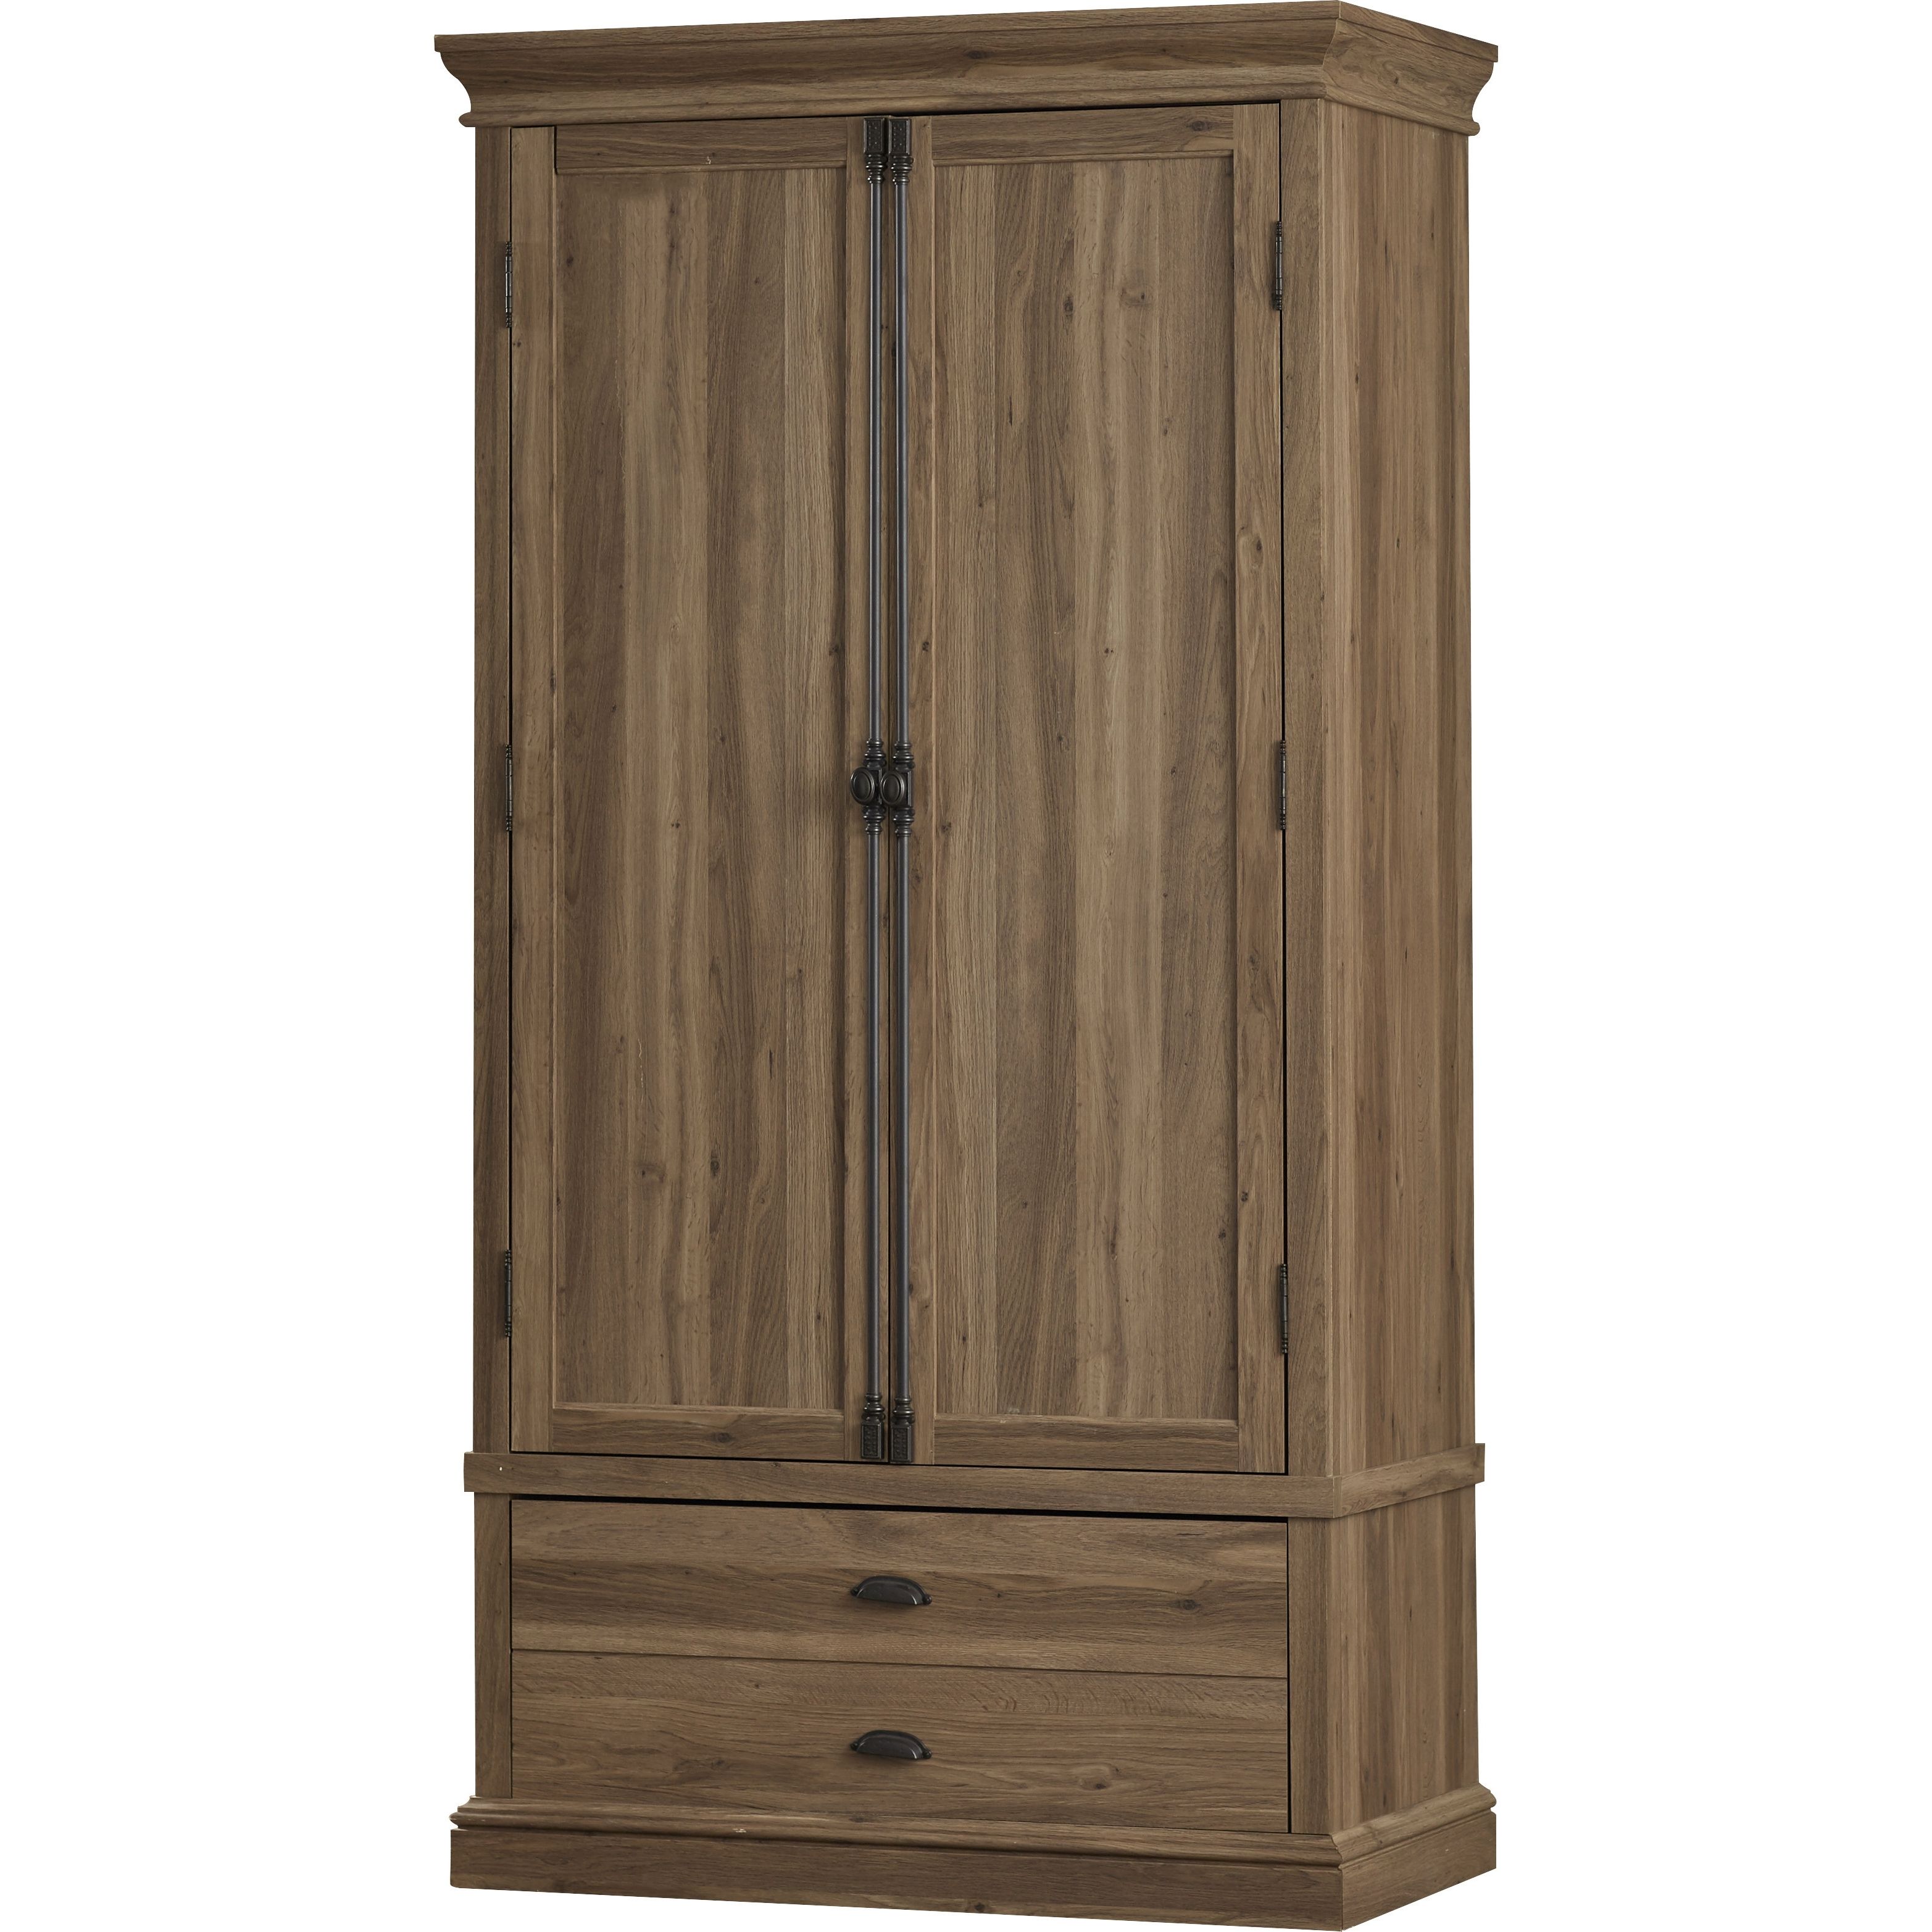 Popular Black Wardrobes With Drawers For Furniture : Tall Wardrobes Corner Armoire Armoire For Hanging (View 7 of 15)